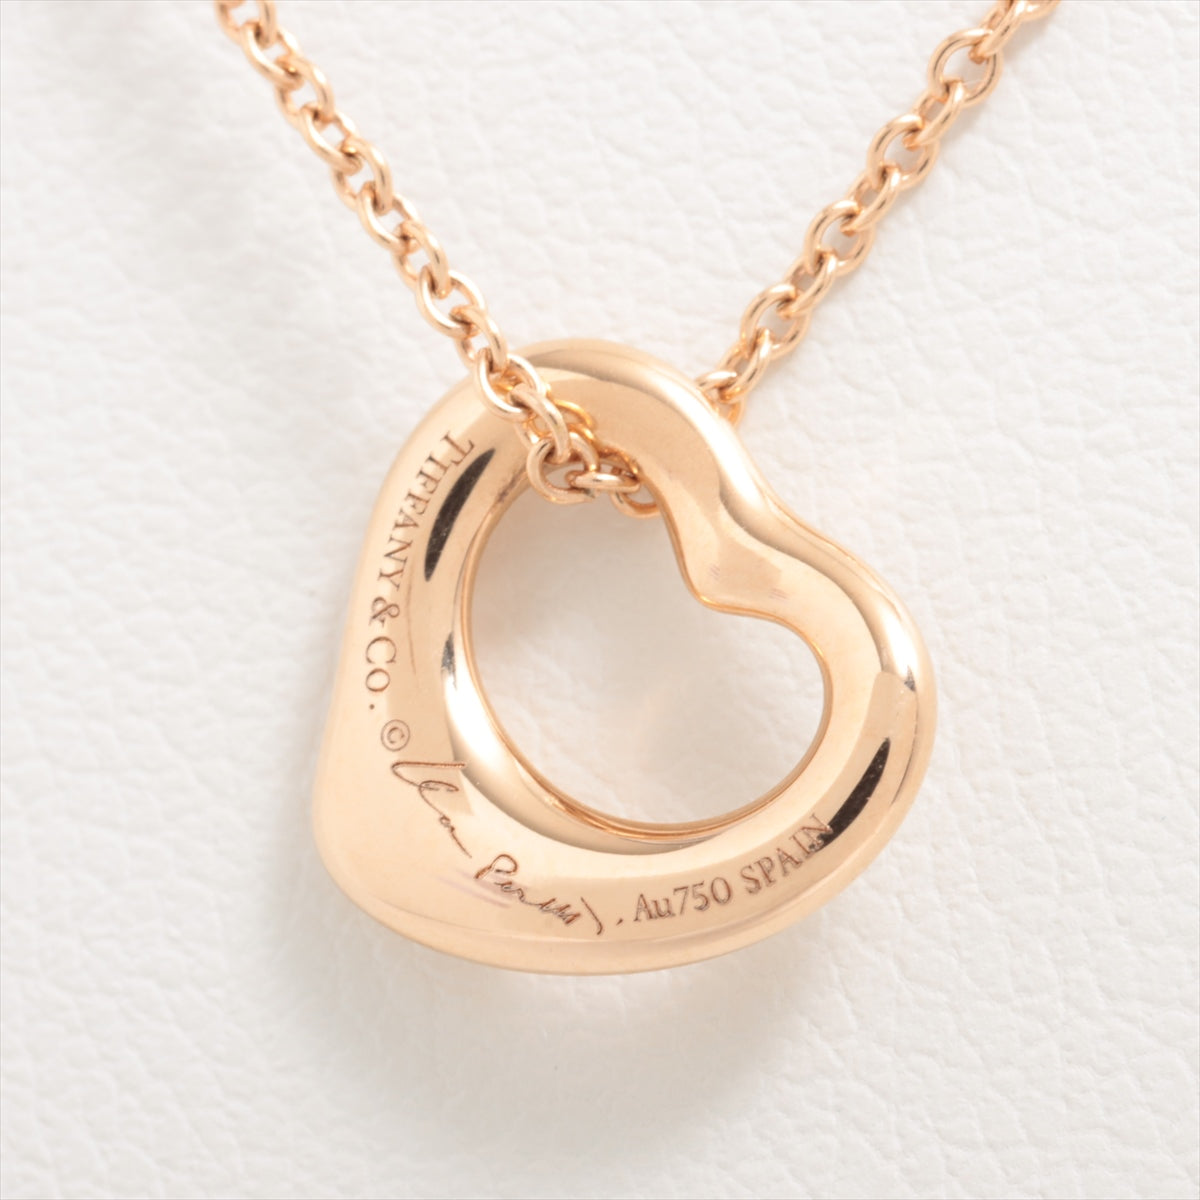 Tiffany Open Heart Necklace 750(PG) 3.0g